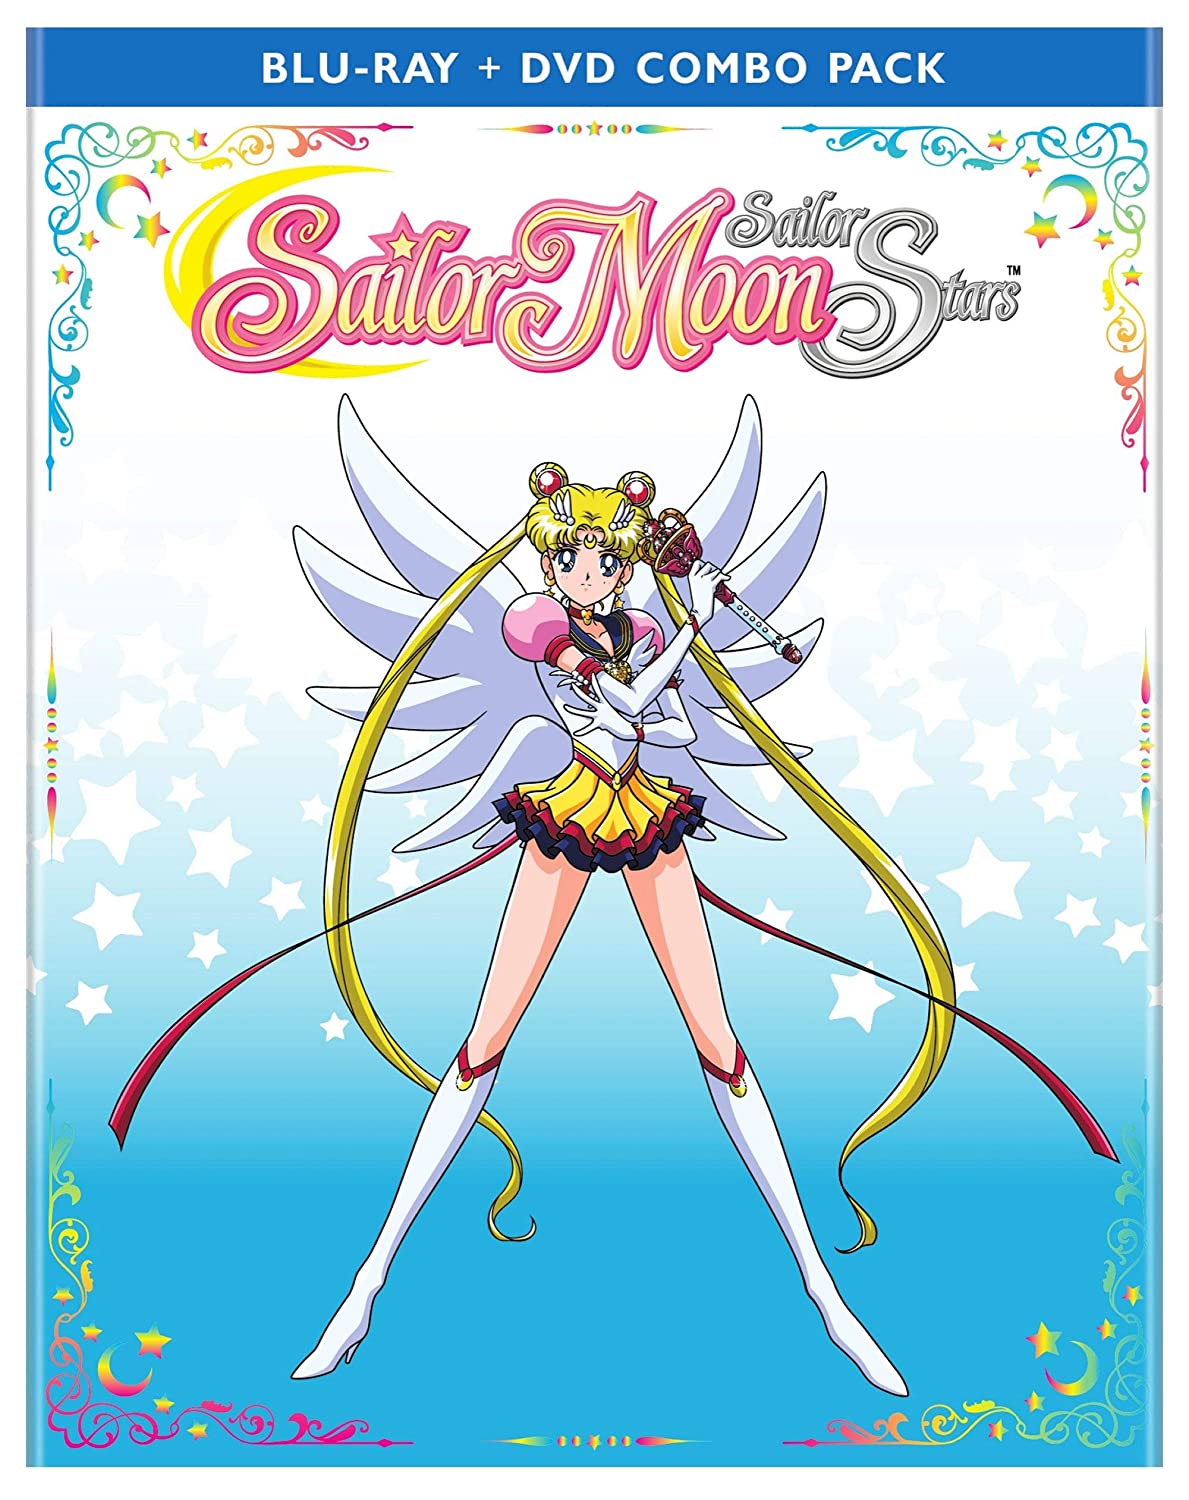 DVD cover of Sailor Moon Sailor Stars, with Sailor Moon striking a pose